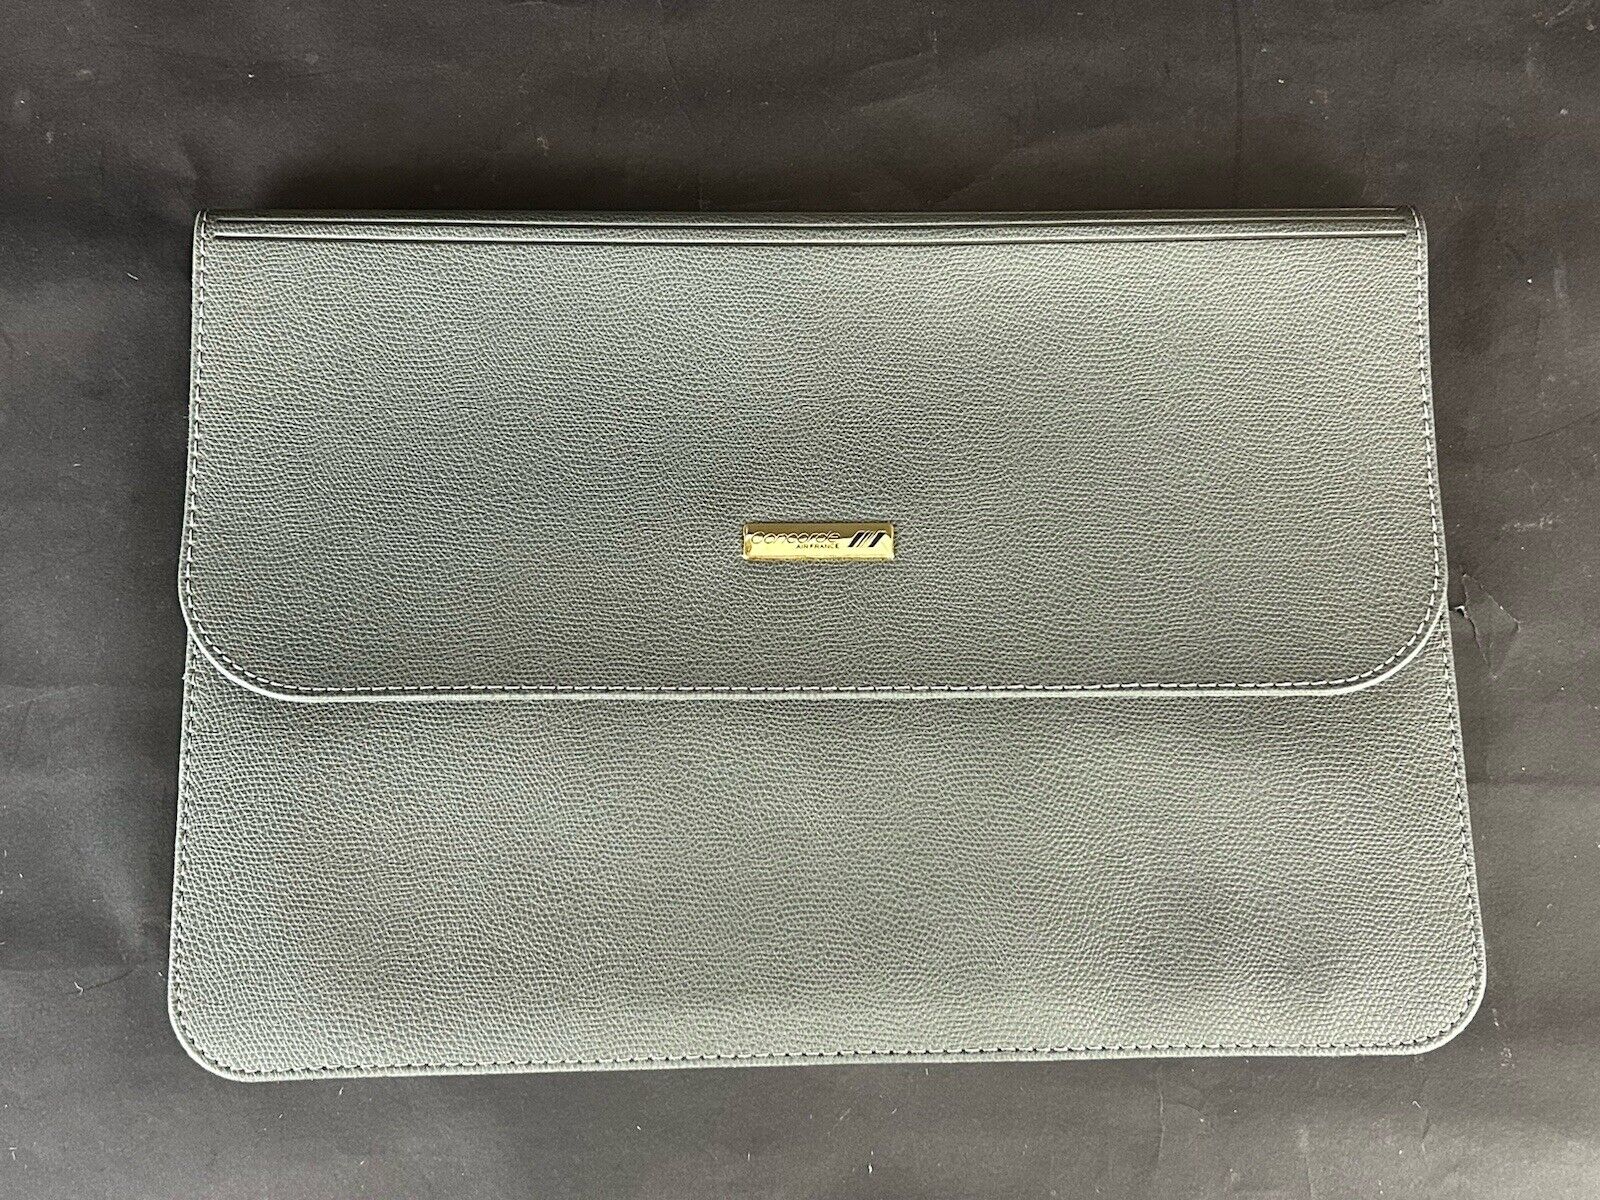 Air France Concord Leather Document Holder Pouch